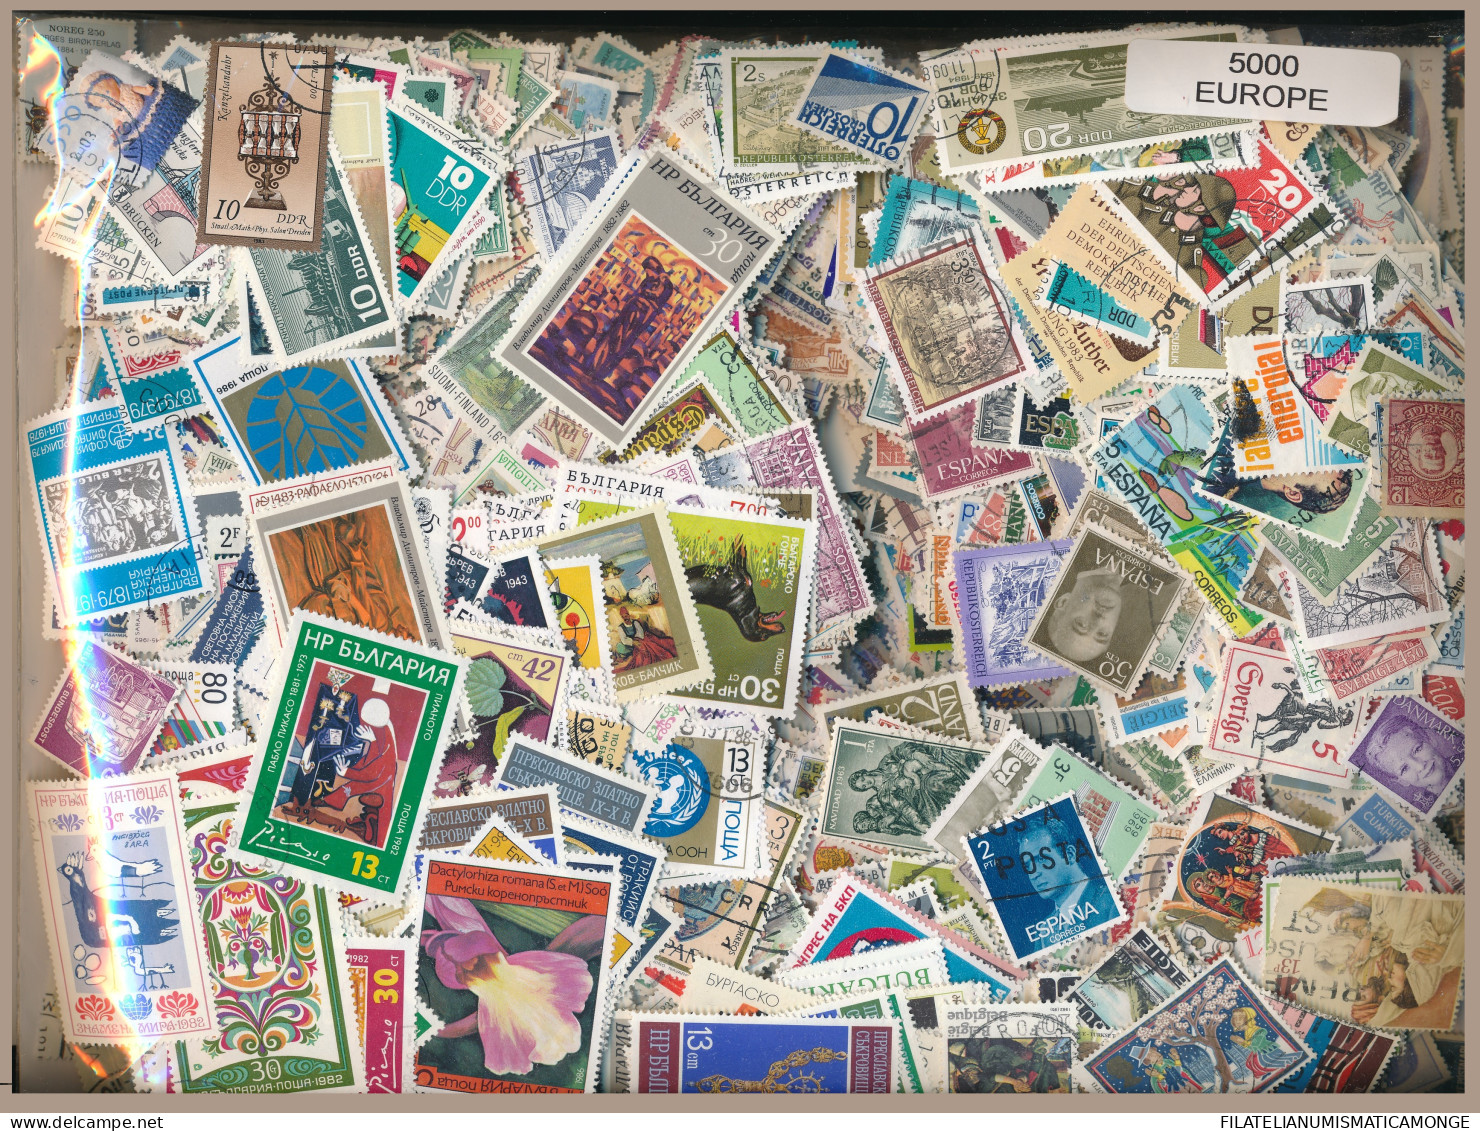  Offer - Lot Stamps - Paqueteria  Paises Europeos 5000 Sellos Diferentes        - Lots & Kiloware (mixtures) - Min. 1000 Stamps